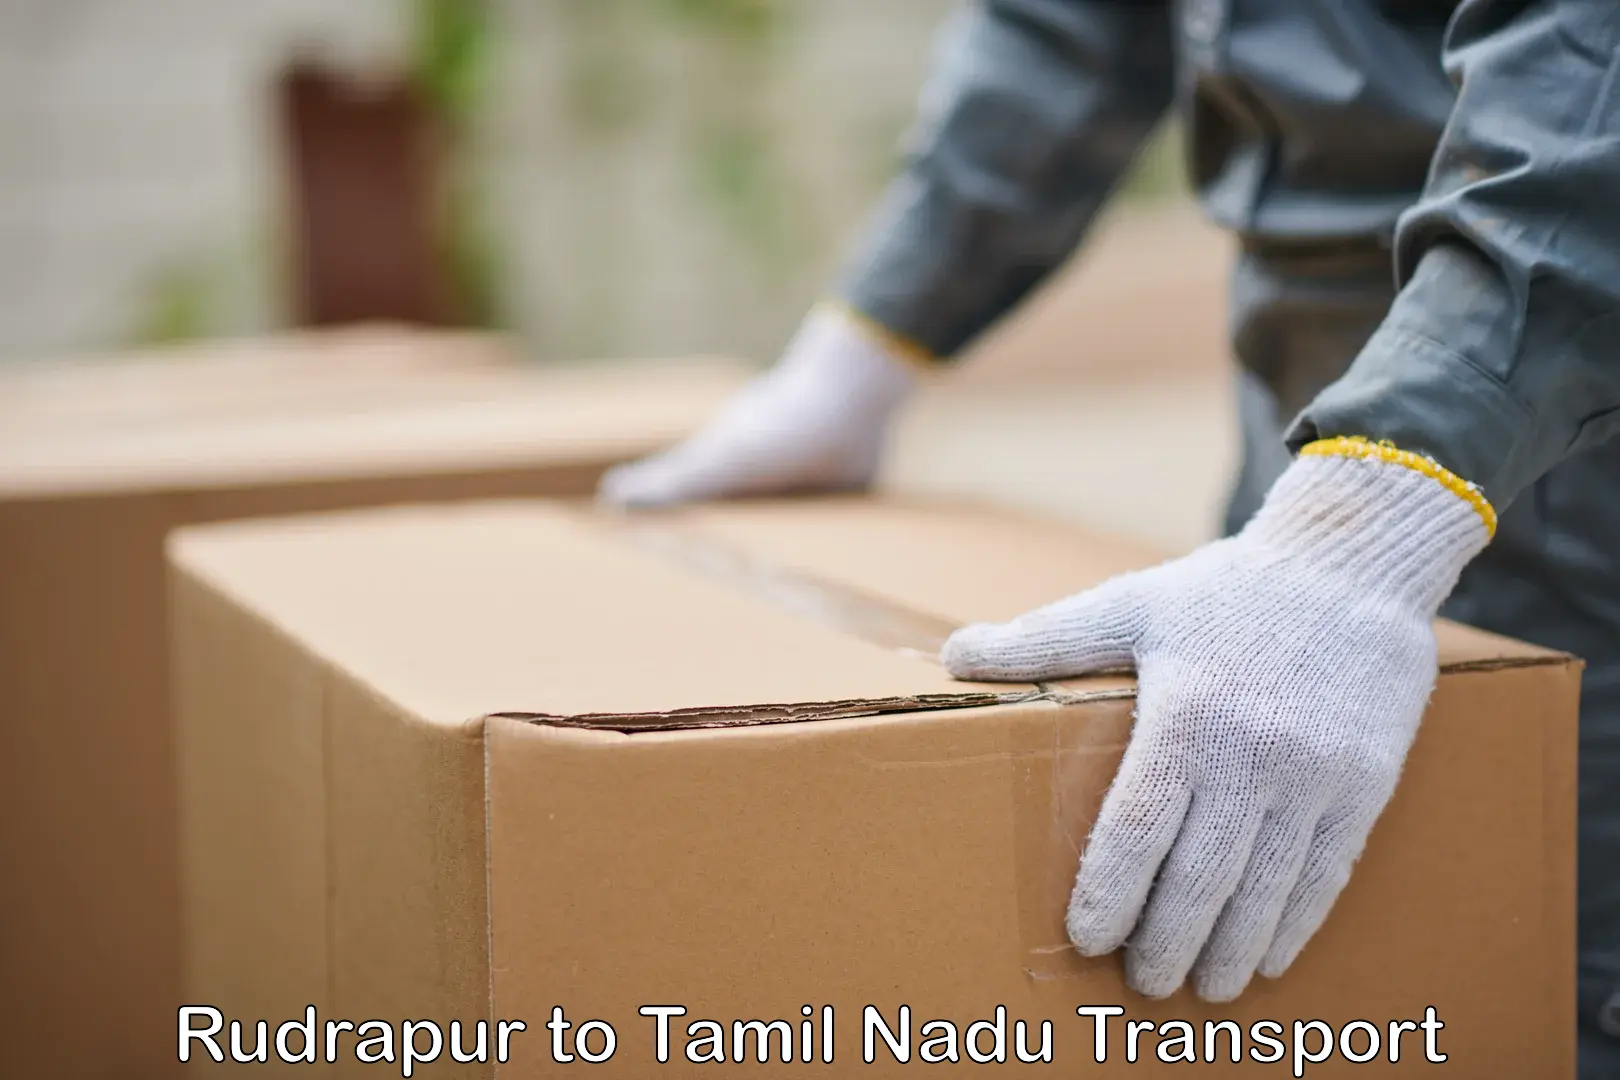 Truck transport companies in India in Rudrapur to Chennai